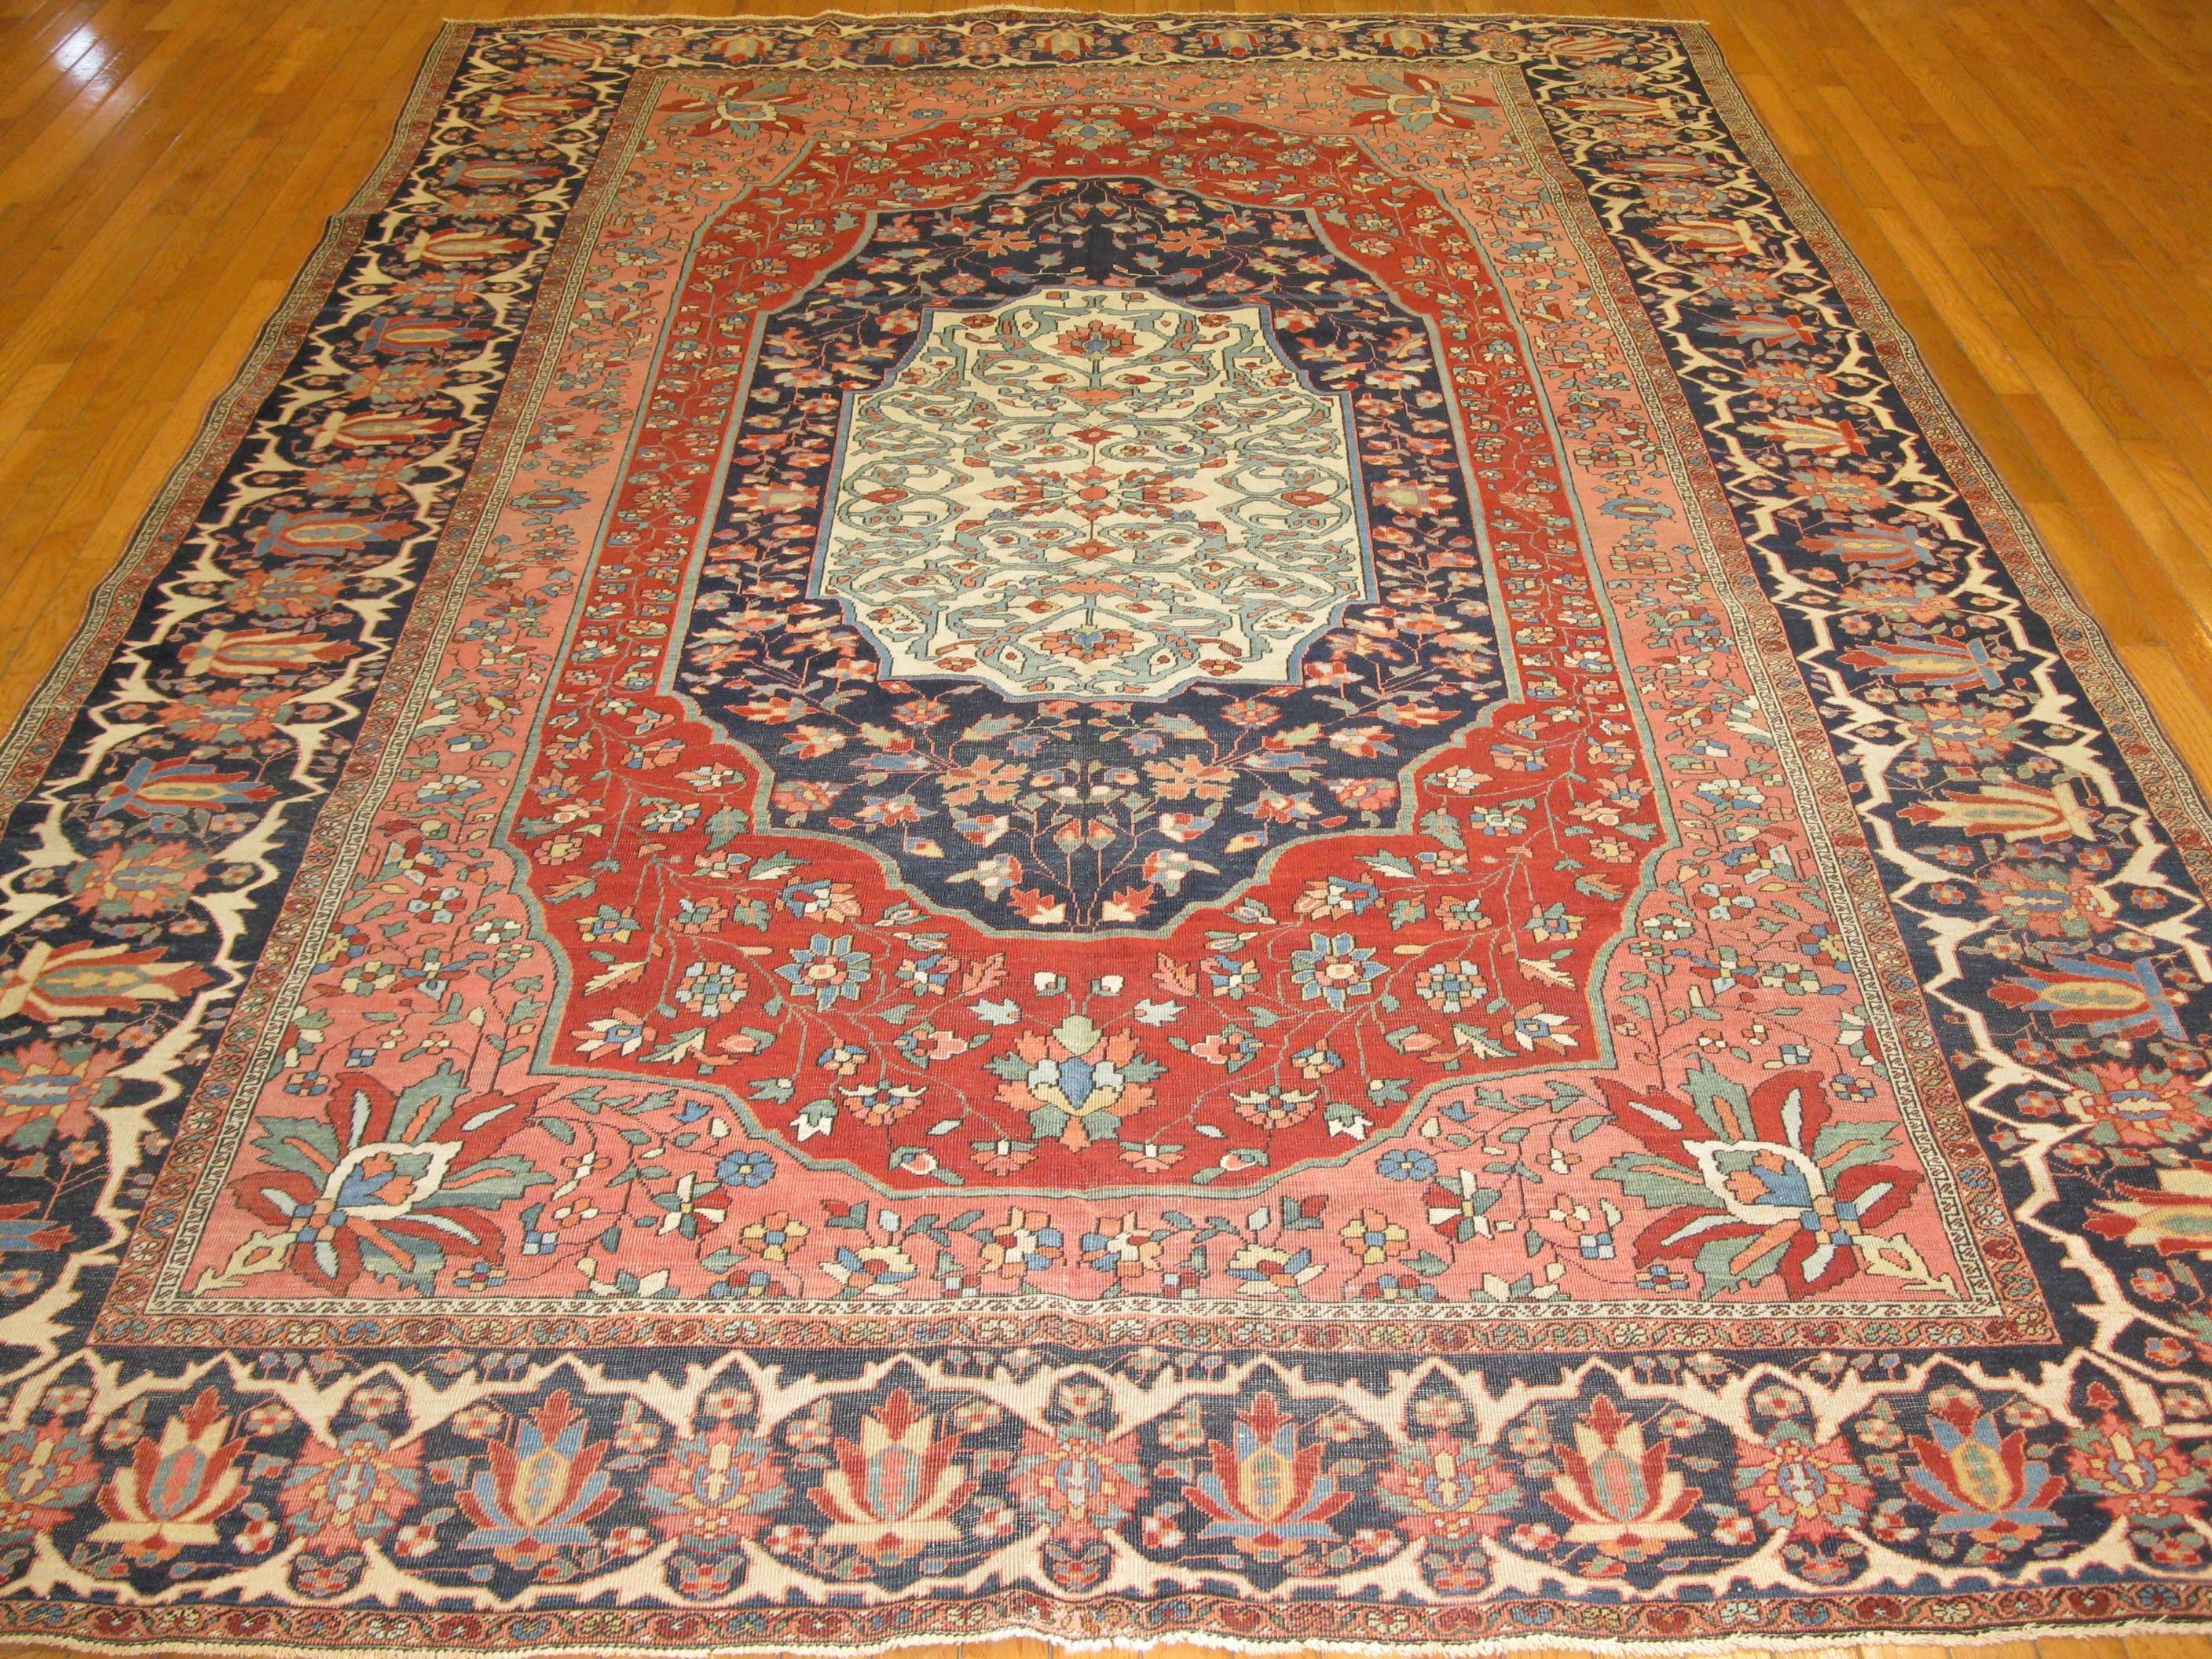 This is a finely knotted beautiful late 19th century antique Persian Sarouk Farahan. It has a distinct concentric three medallion design encased be a detailed nave blue color border. The rug measures 7' 1'' x 10' 2'' and is in great condition.